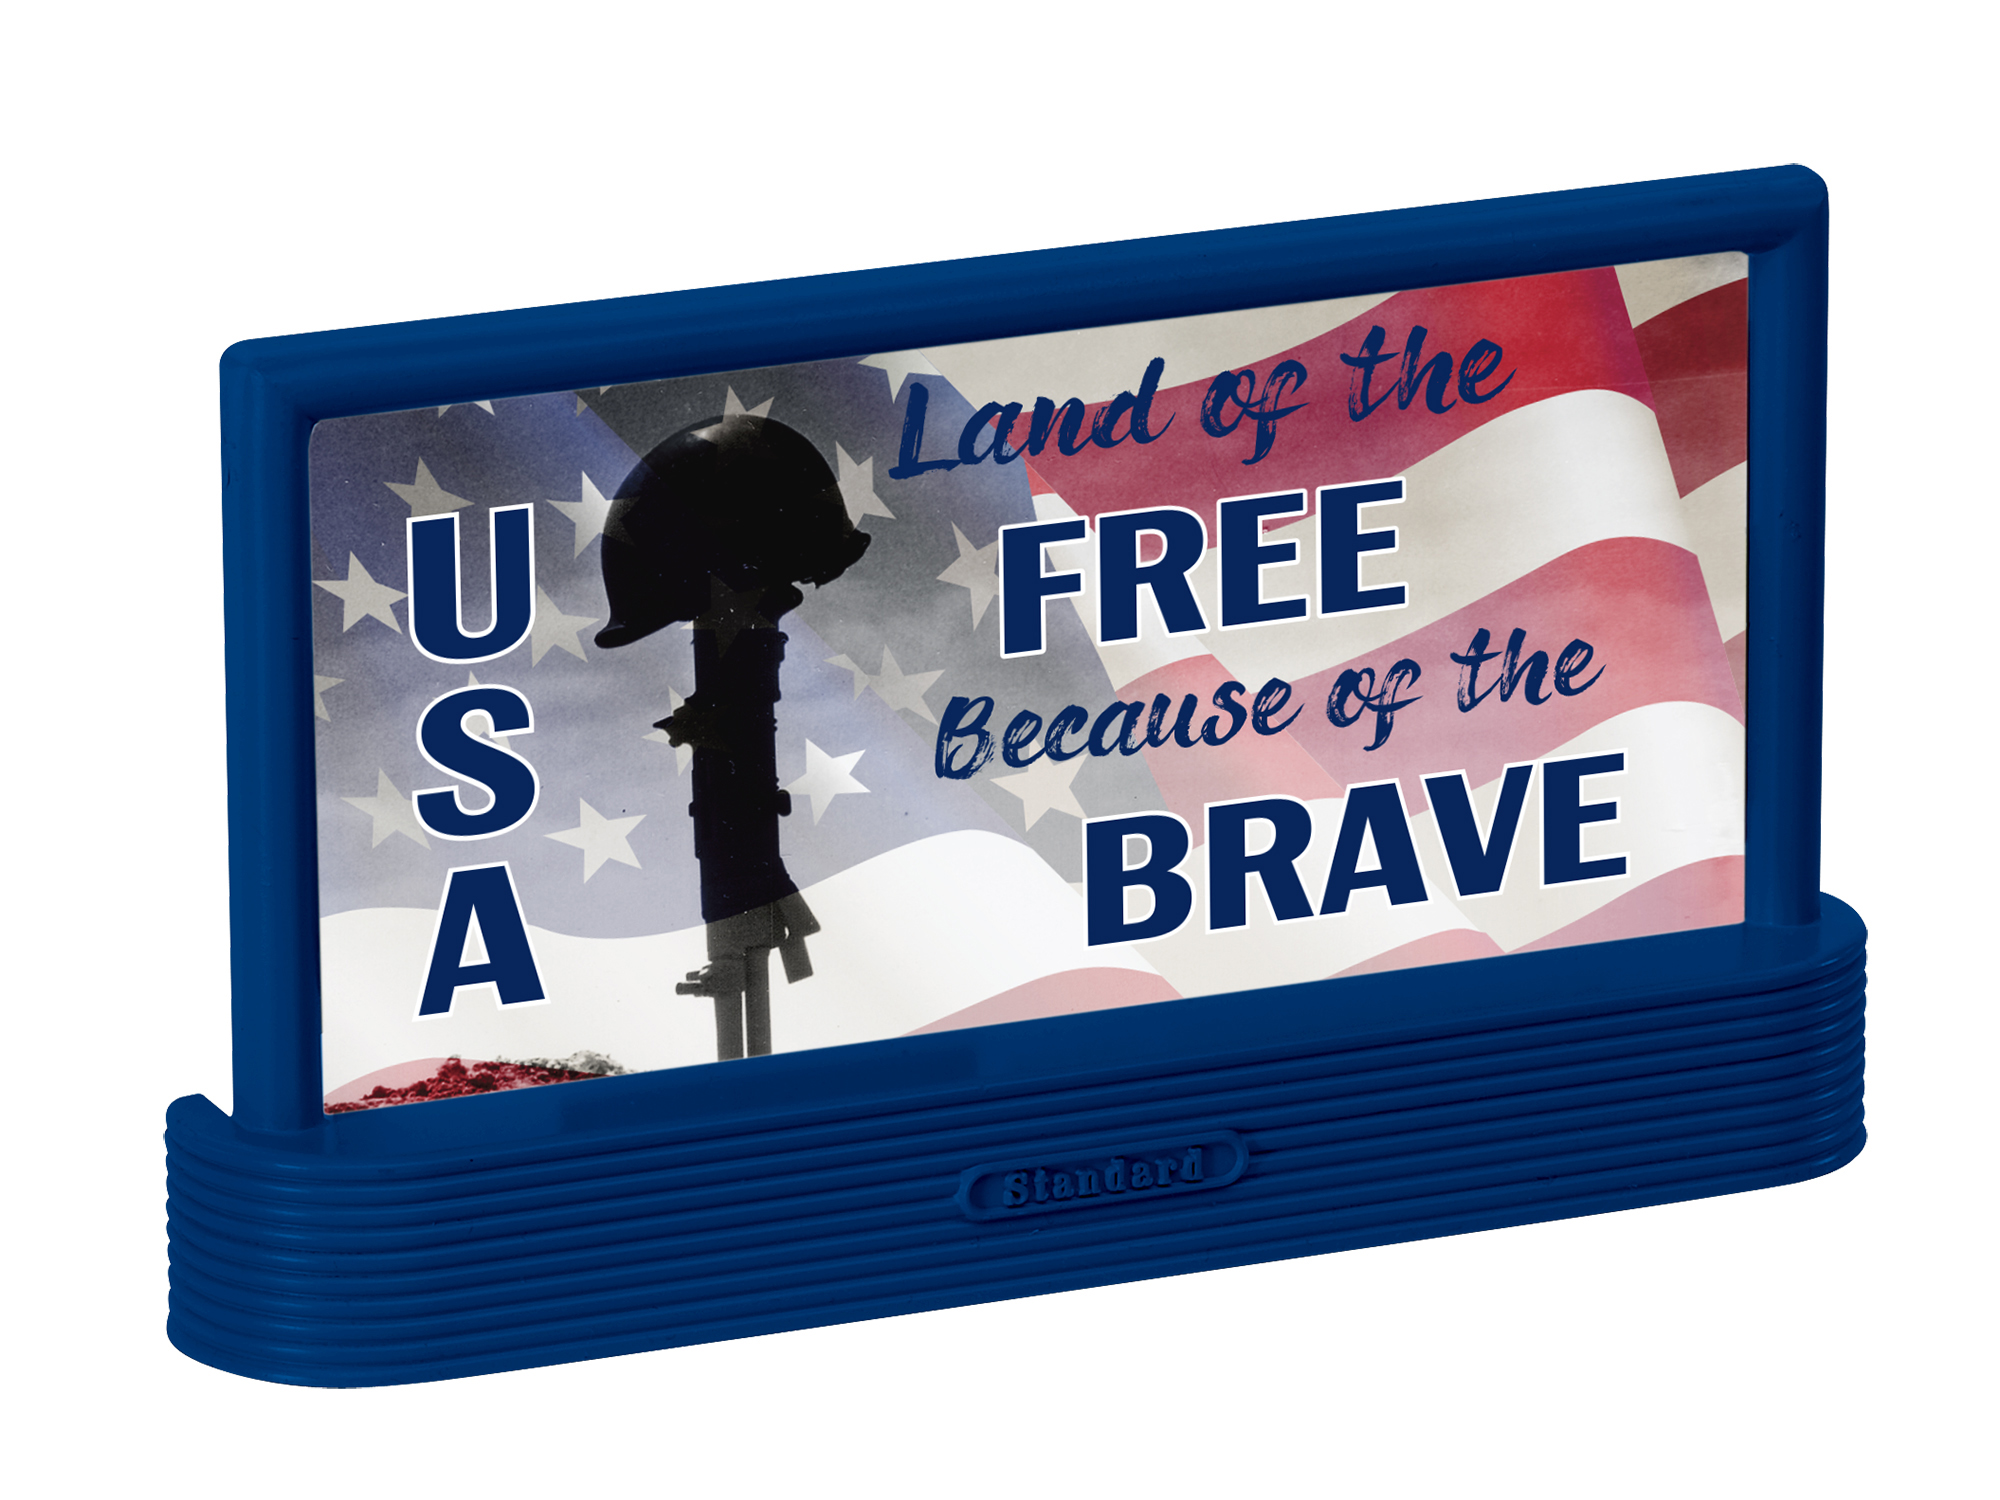 Stars & Stripes Billboard 3-pack - 'USA Land of the Free Because of the Brave' image